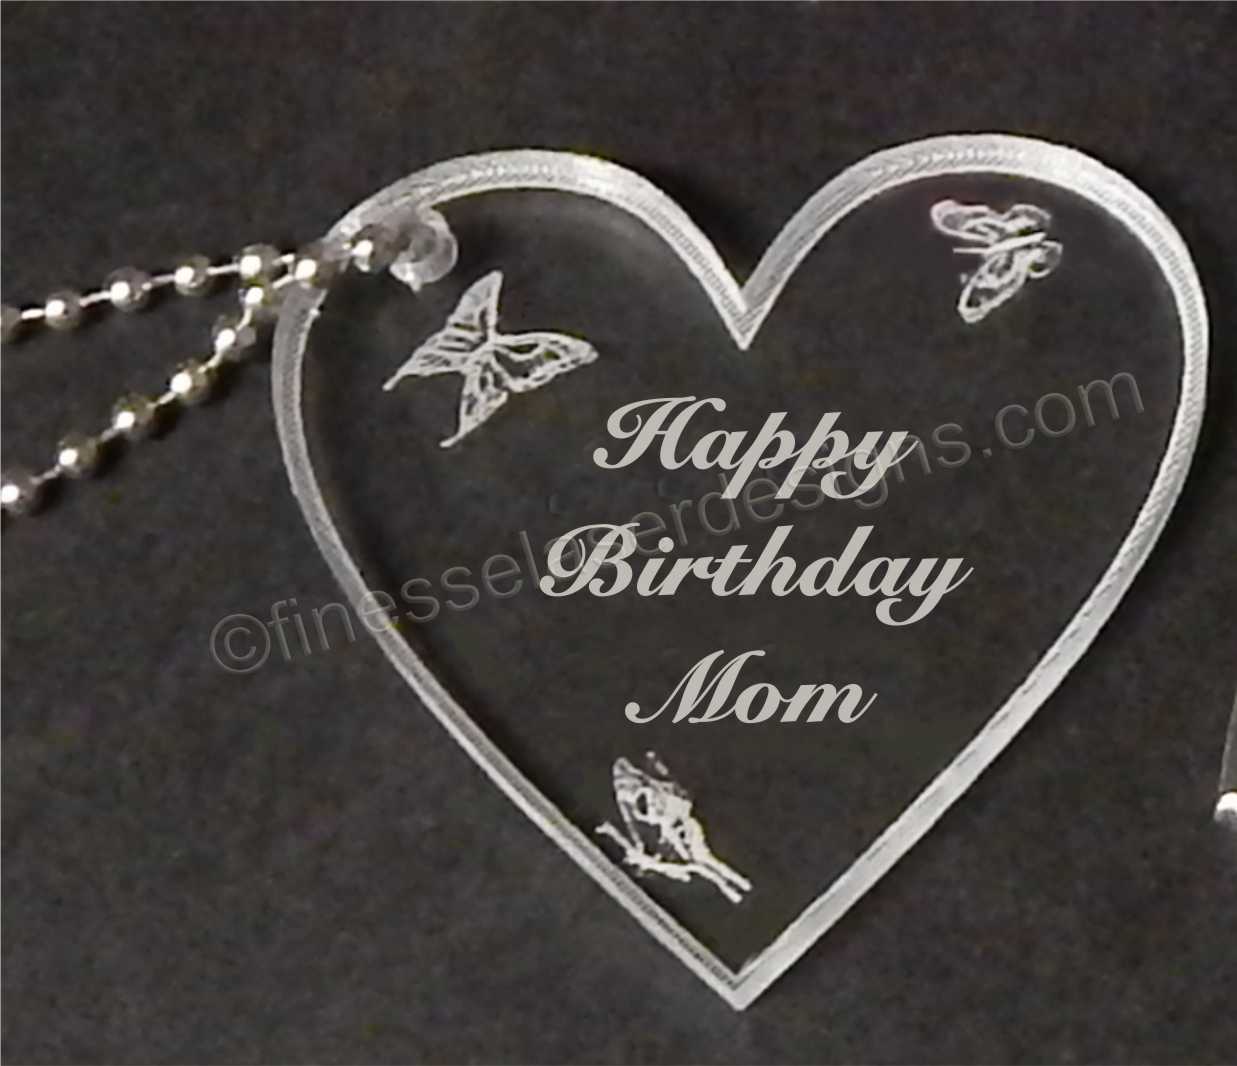 acrylic heart shaped keychain with butterflies and Happy Birthday with name engraved along with small metal chain attached